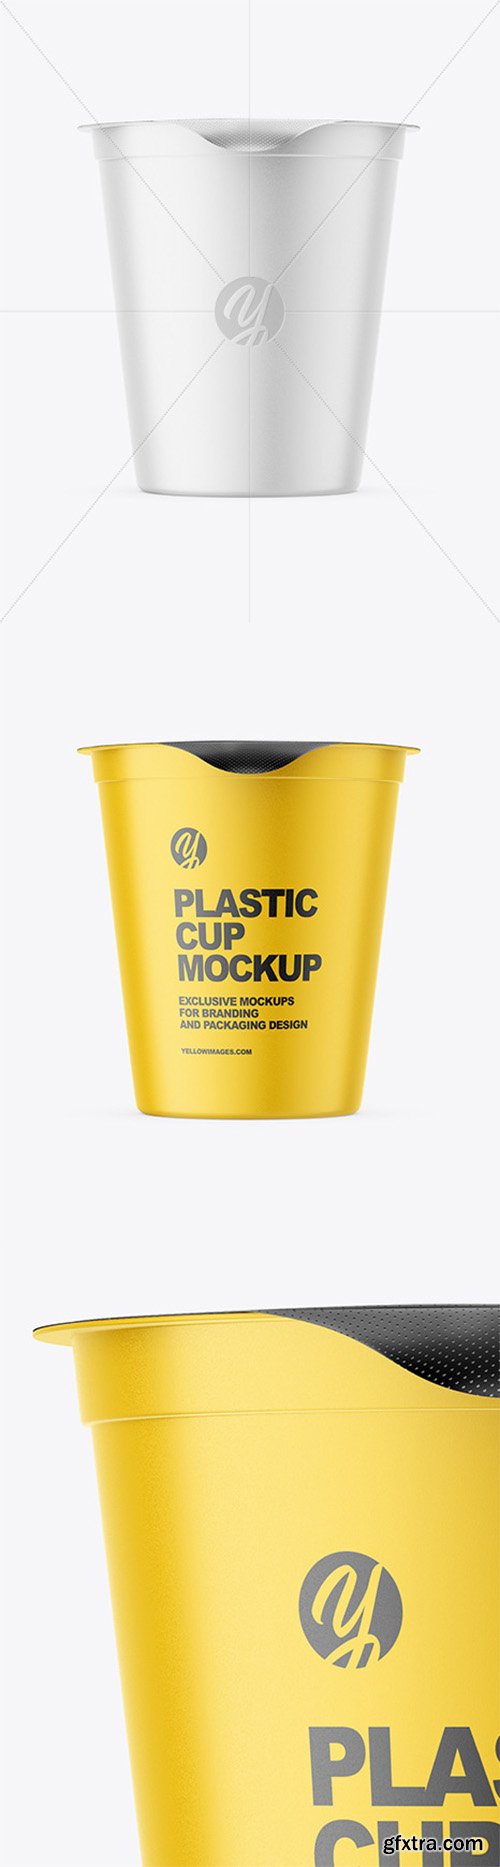 Download Yellowimages Mockups Containers Box Mockup Potoshop Yellowimages Mockups